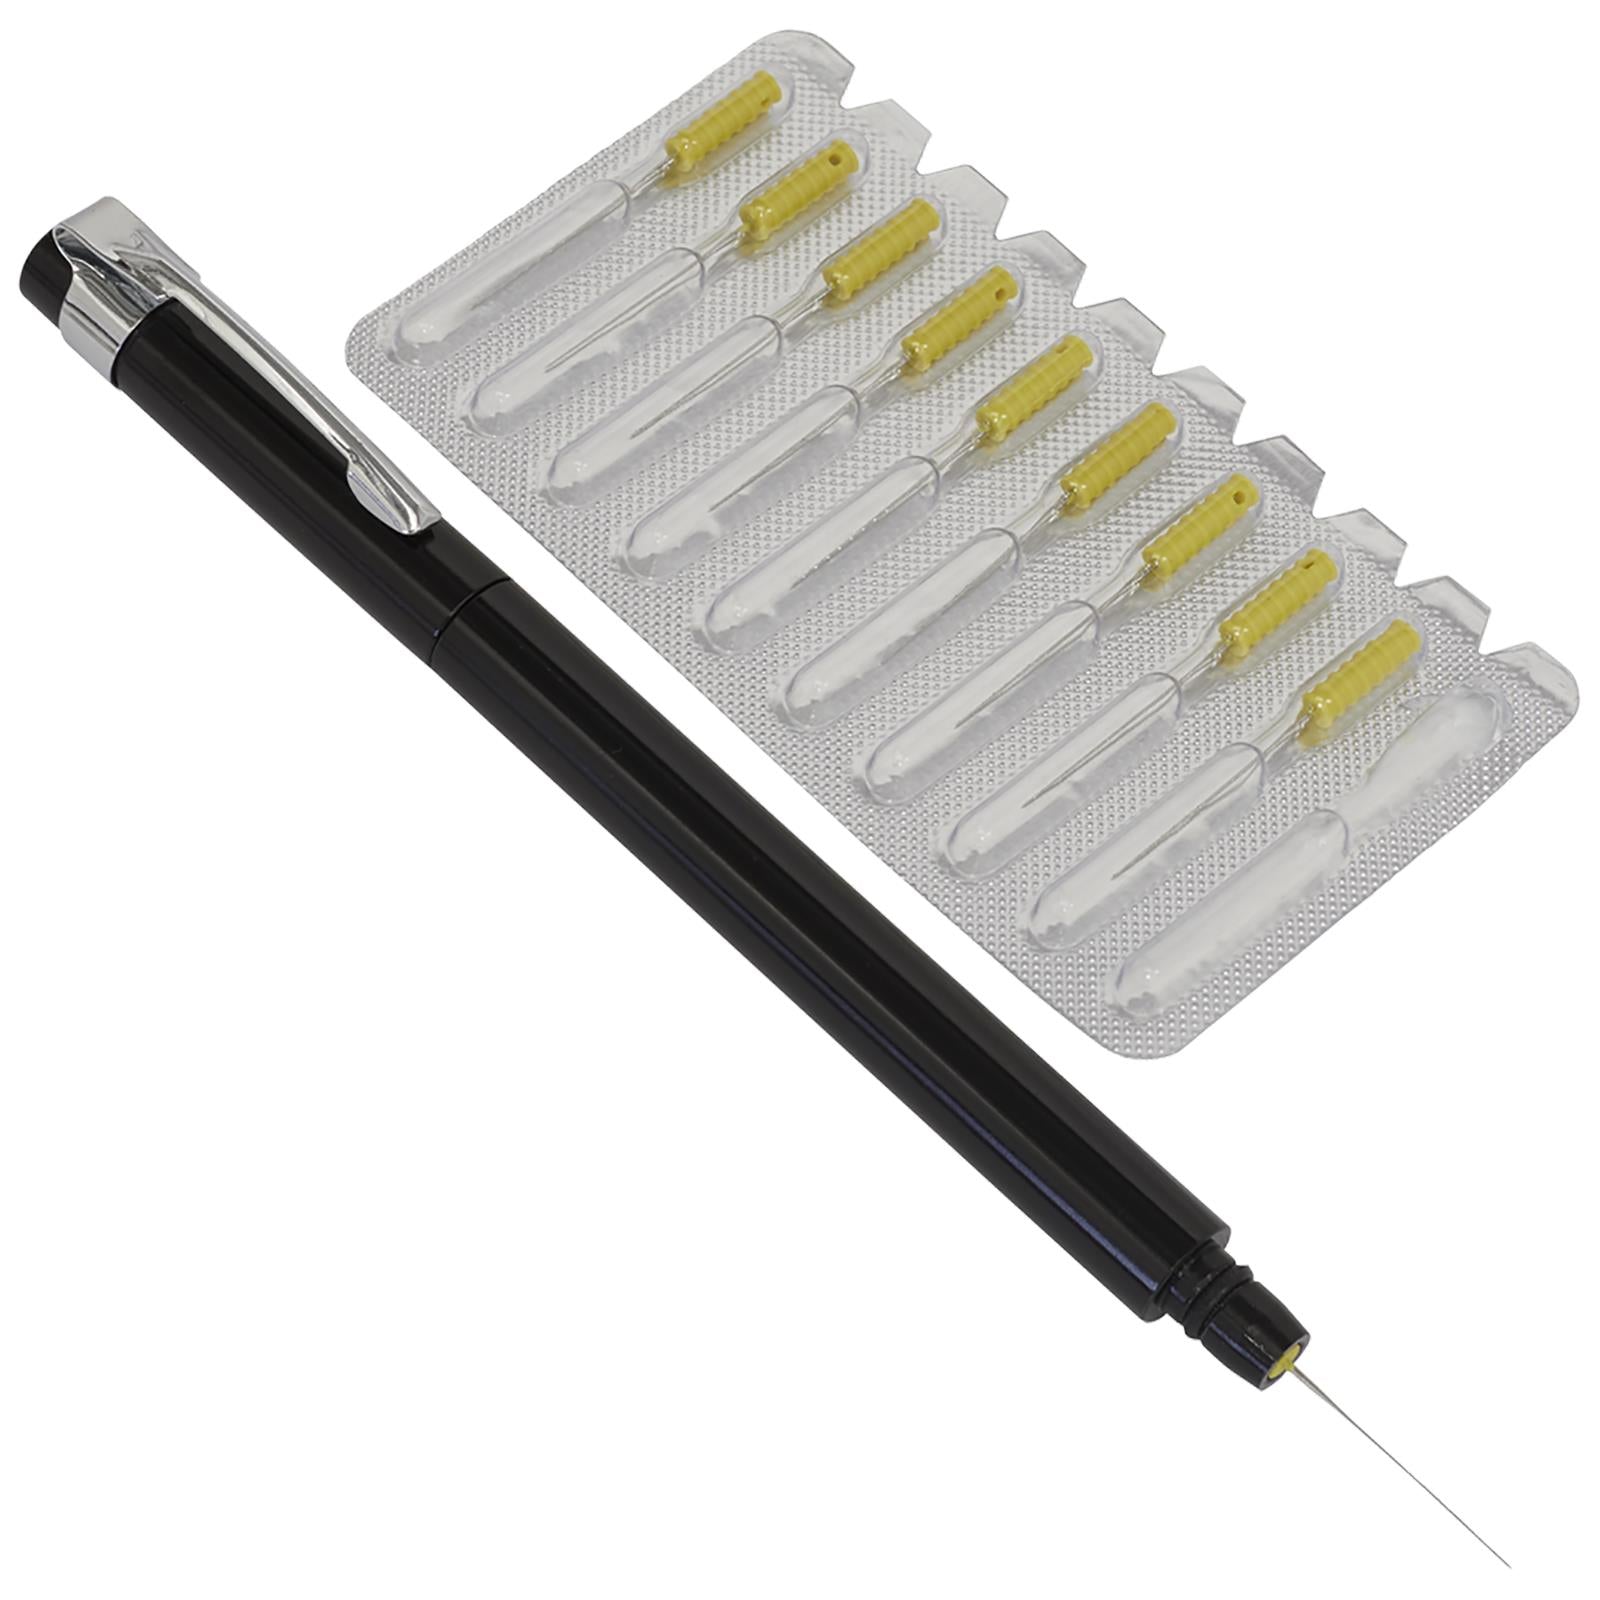 Sealey Paint Dirt Removal Pen with Needle Set